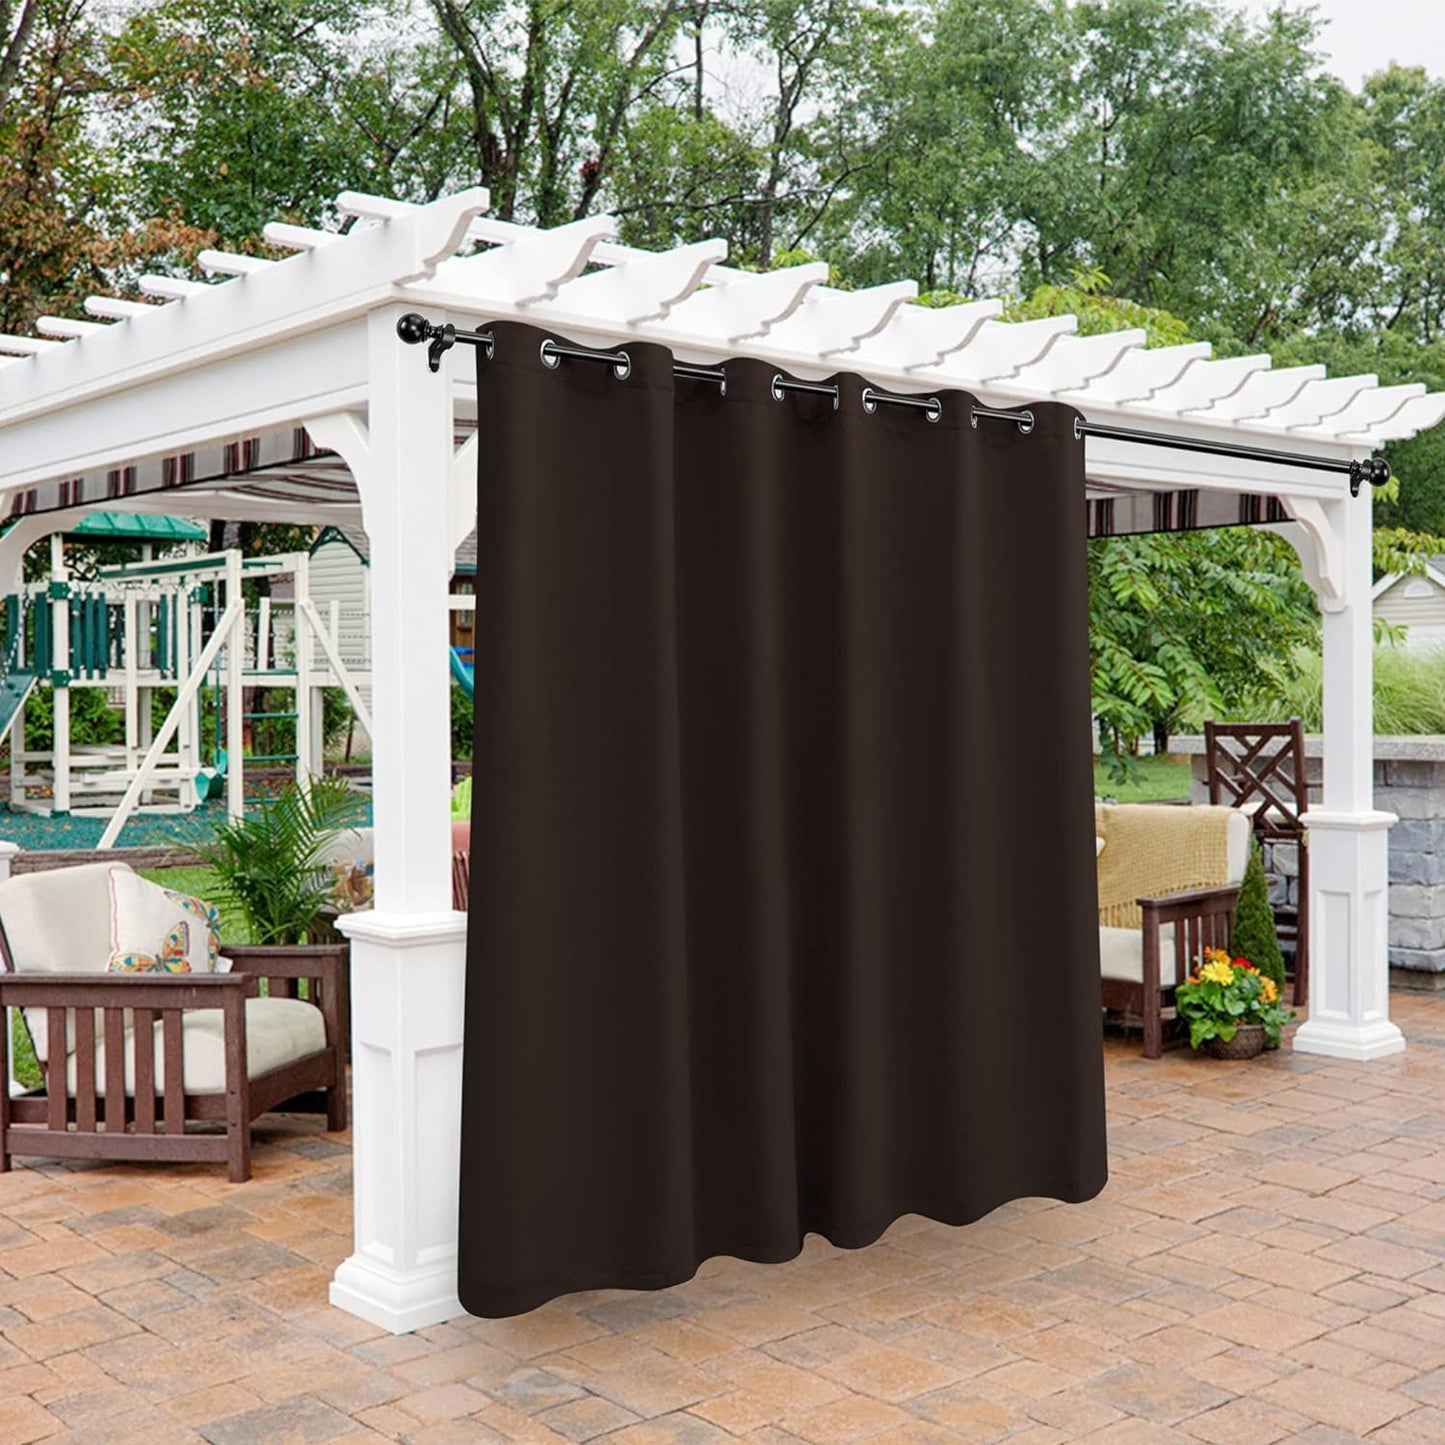 BONZER Outdoor Curtains for Patio Waterproof - Light Blocking Weather Resistant Privacy Grommet Blackout Curtains for Gazebo, Porch, Pergola, Cabana, Deck, Sunroom, 1 Panel, 52W X 84L Inch, Silver  BONZER Chocolate 100W X 95 Inch 